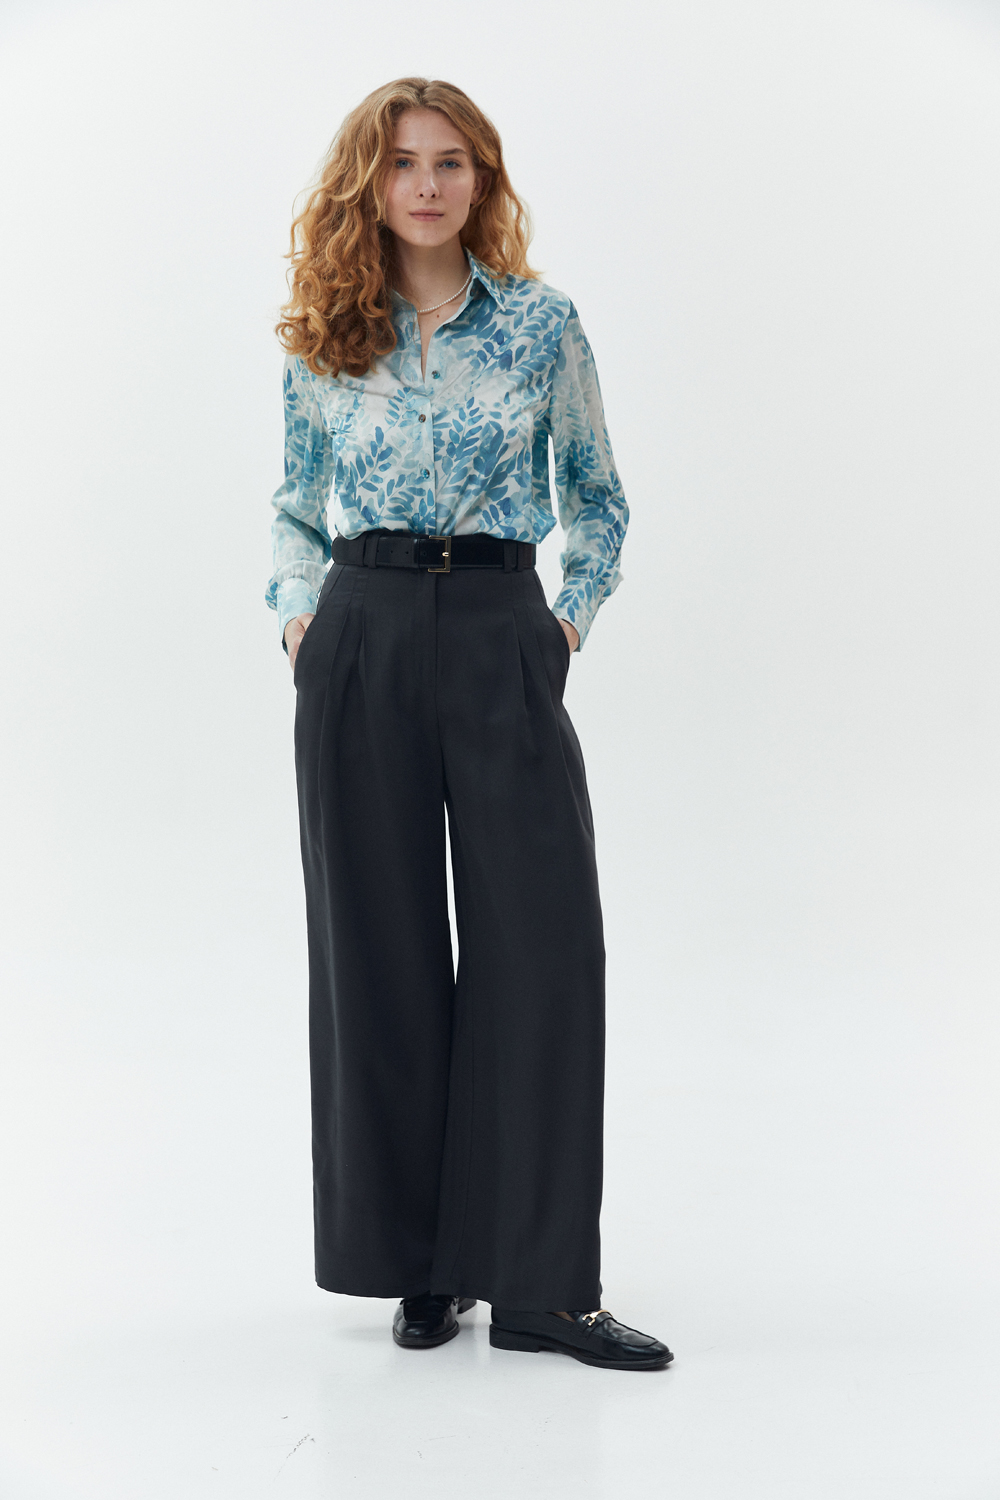 Graphite palazzo pants with pockets